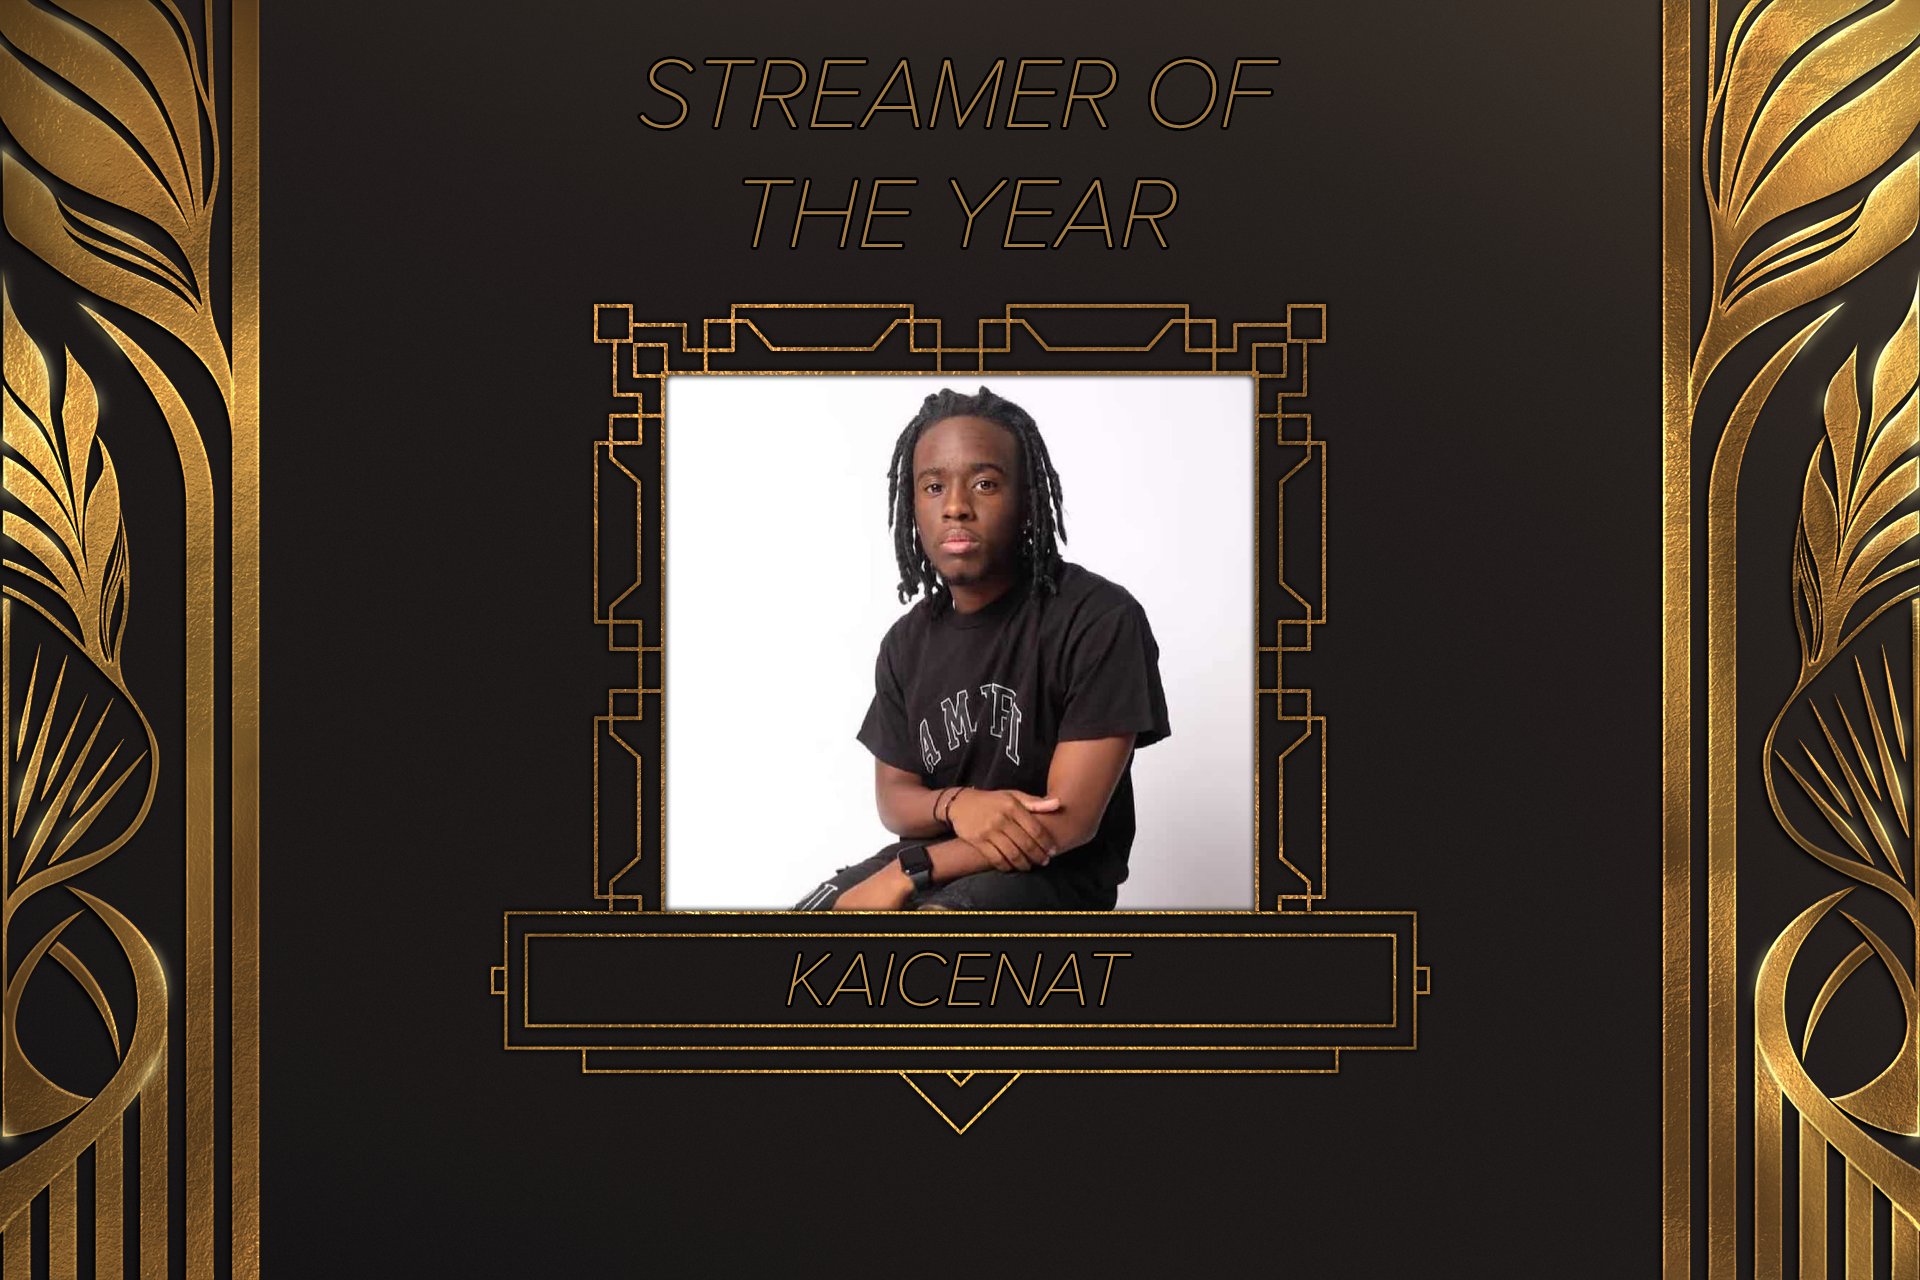 Stats show The Streamer Awards 2023 overtook the 2022 iteration